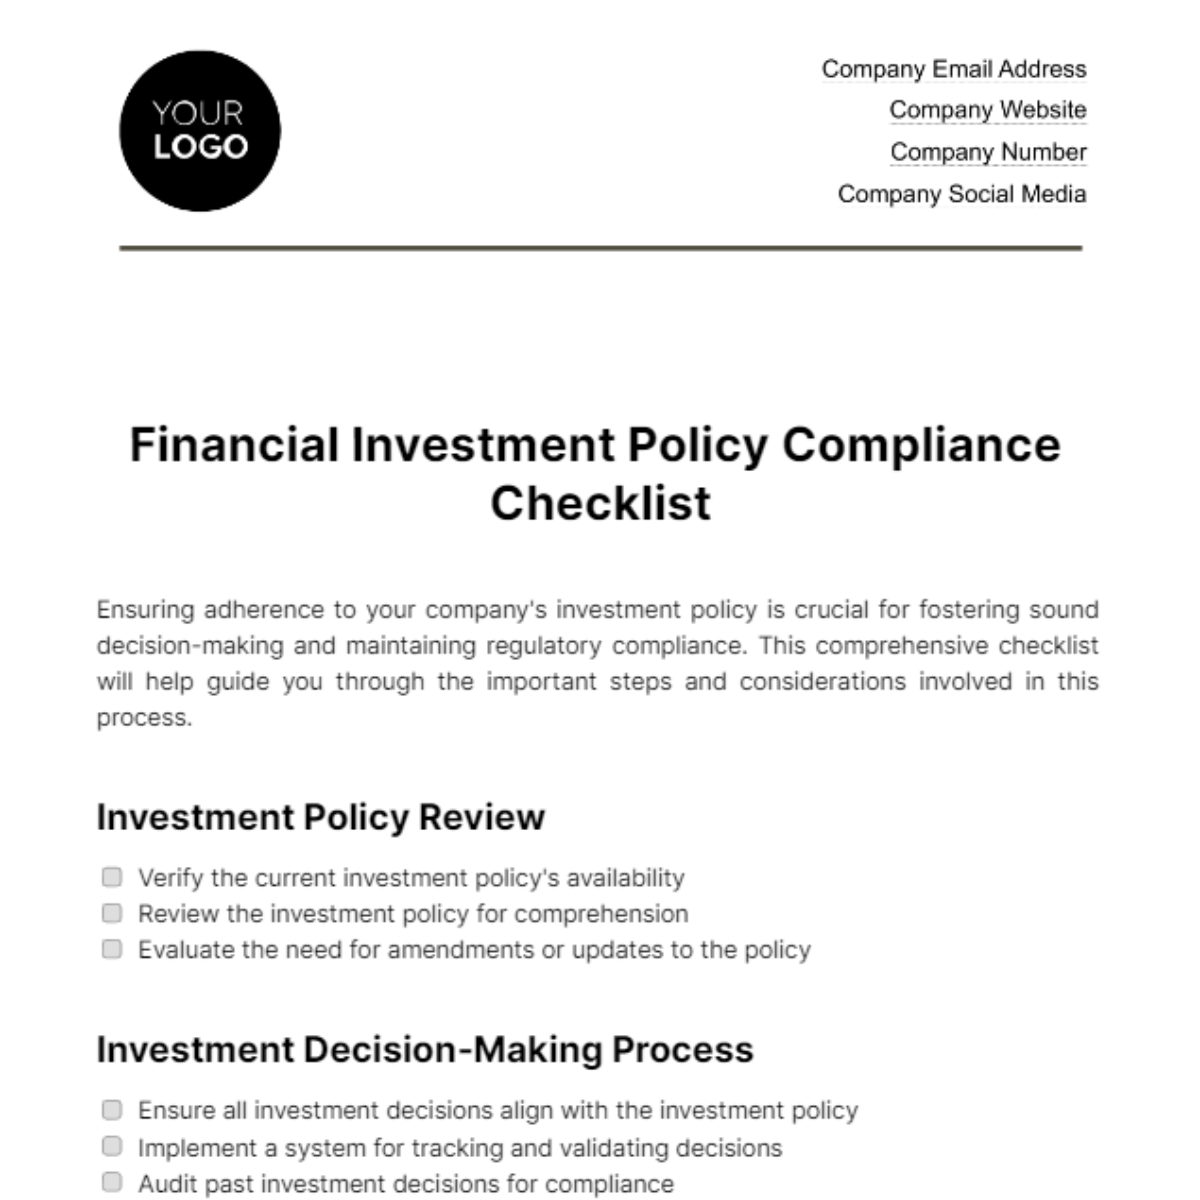 Free Financial Investment Policy Compliance Checklist Template